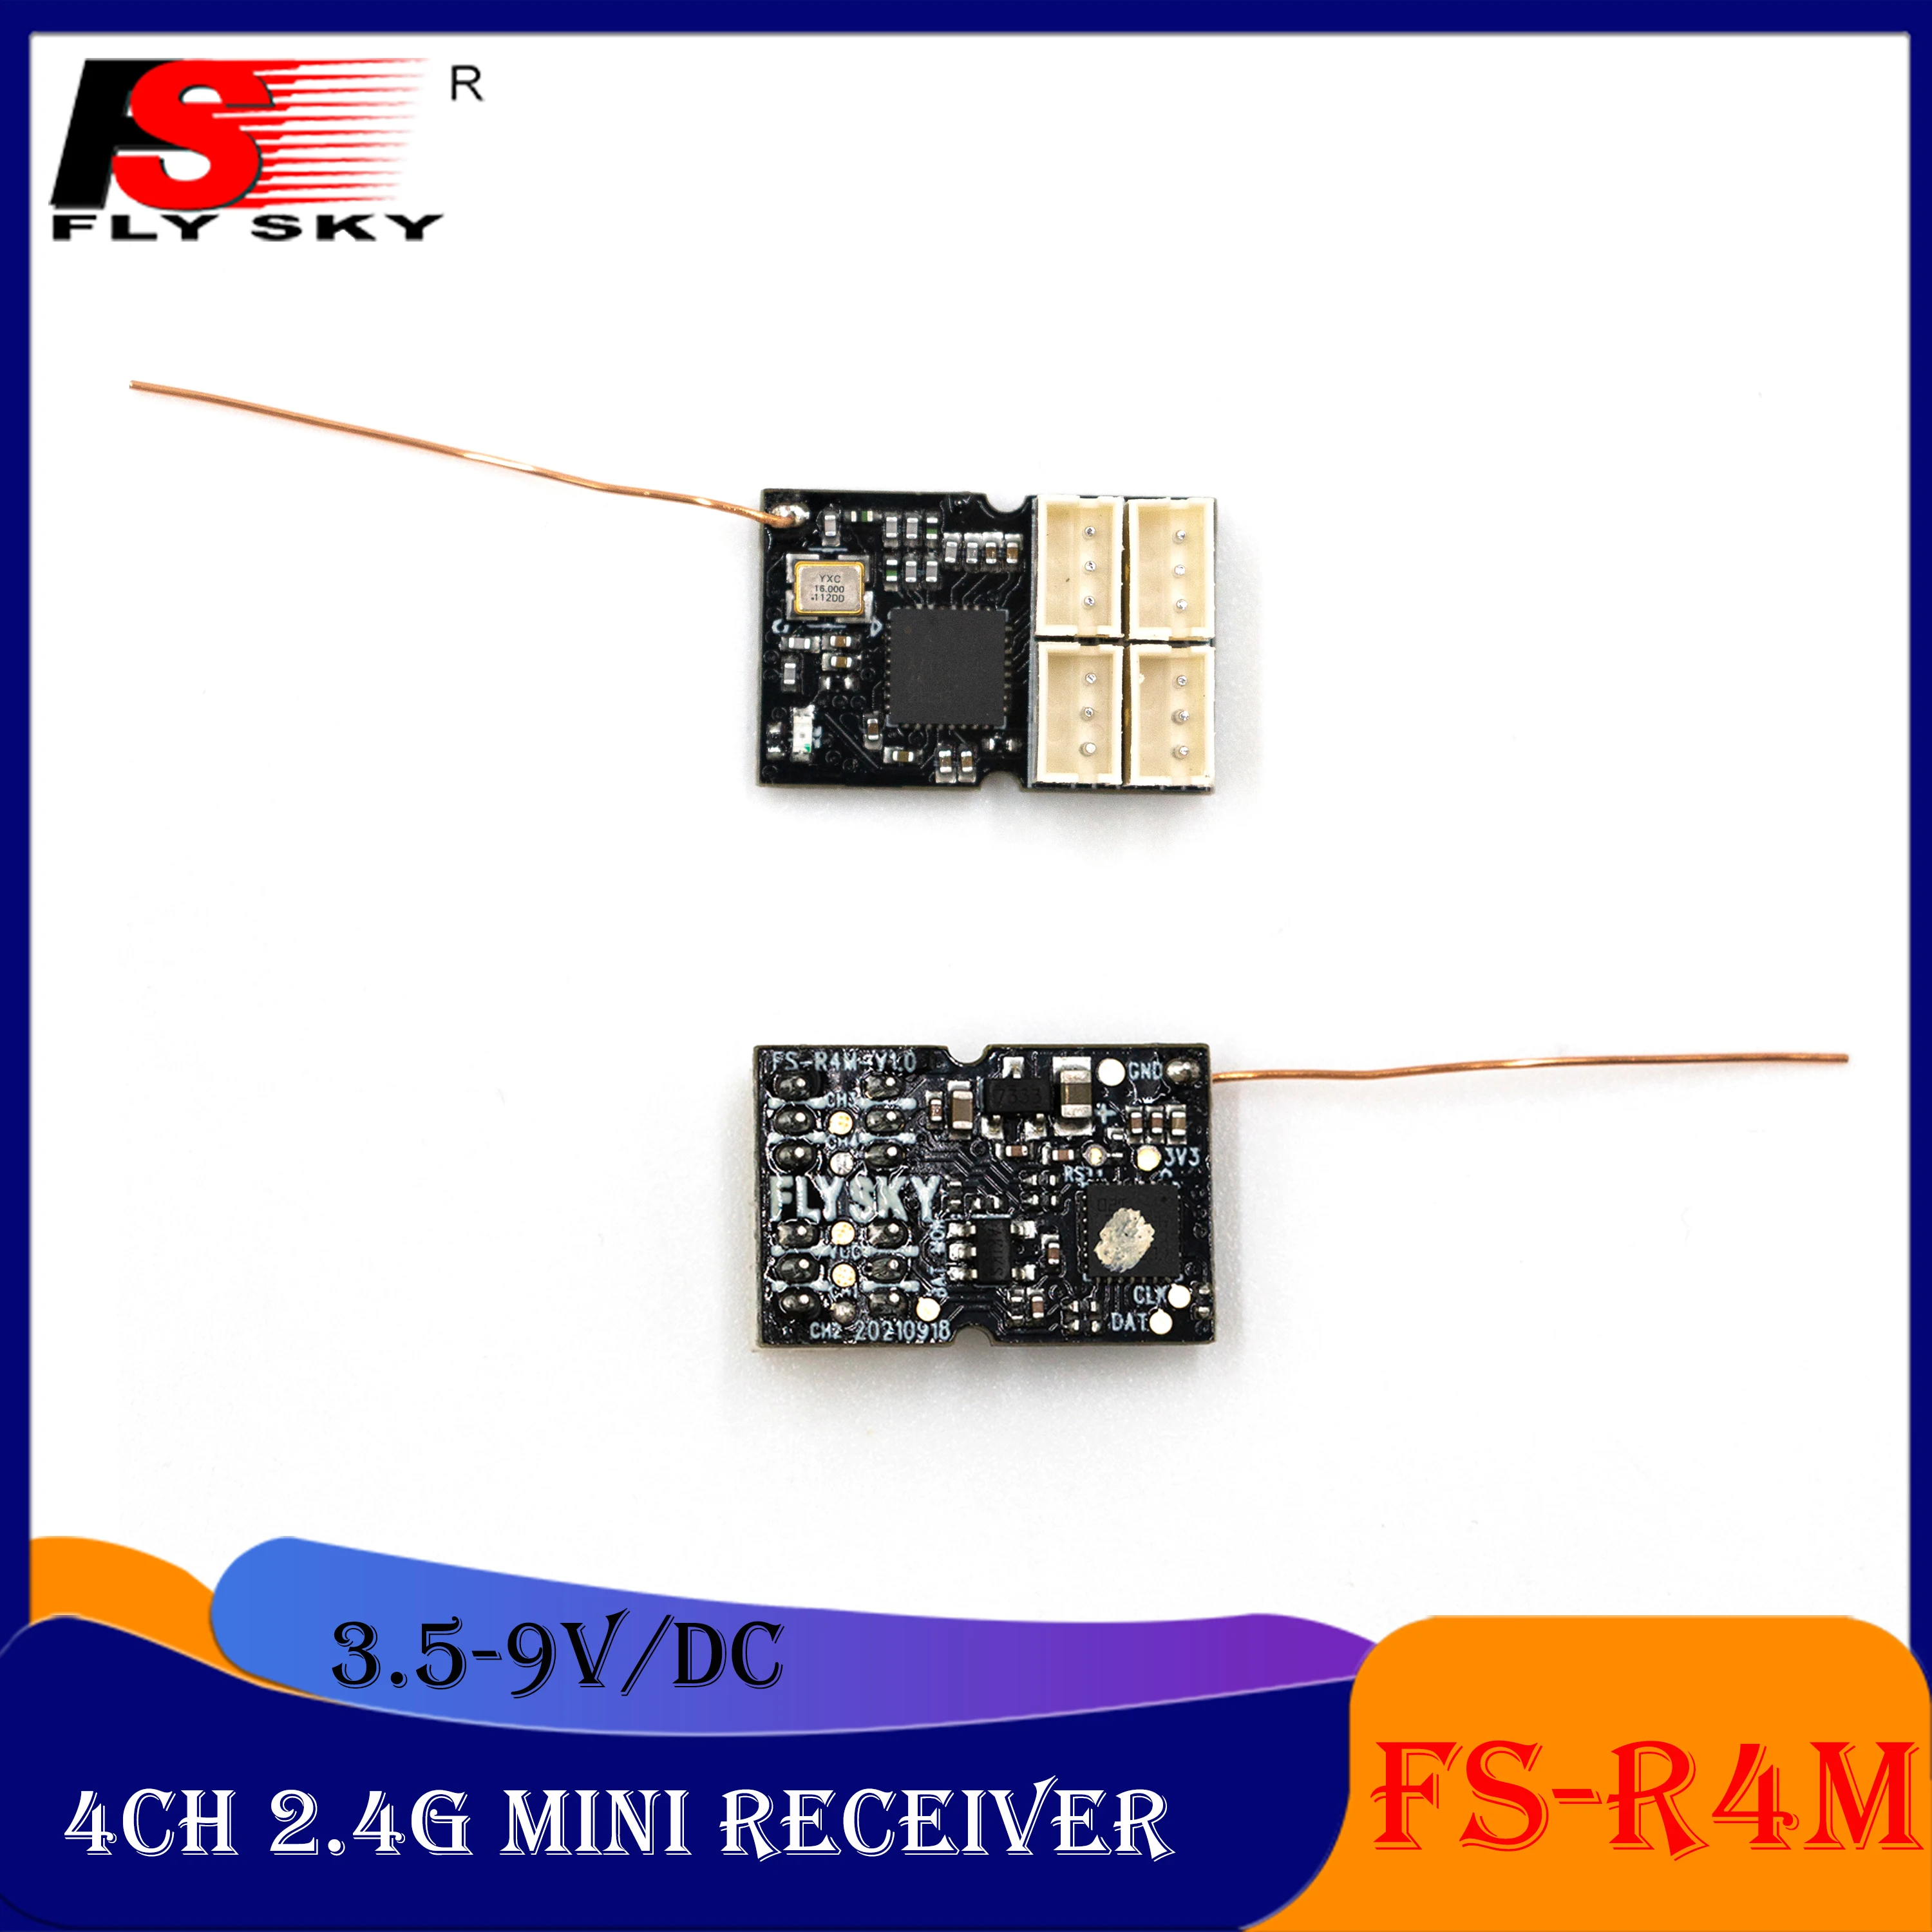 FLYSKY FS-R4M 4 Channels Mini Receiver 2.4G 3.5-9V/DC Single Antenna for RC Micro Cars Model Toy ANT Protocol Transmitter FS-G7P